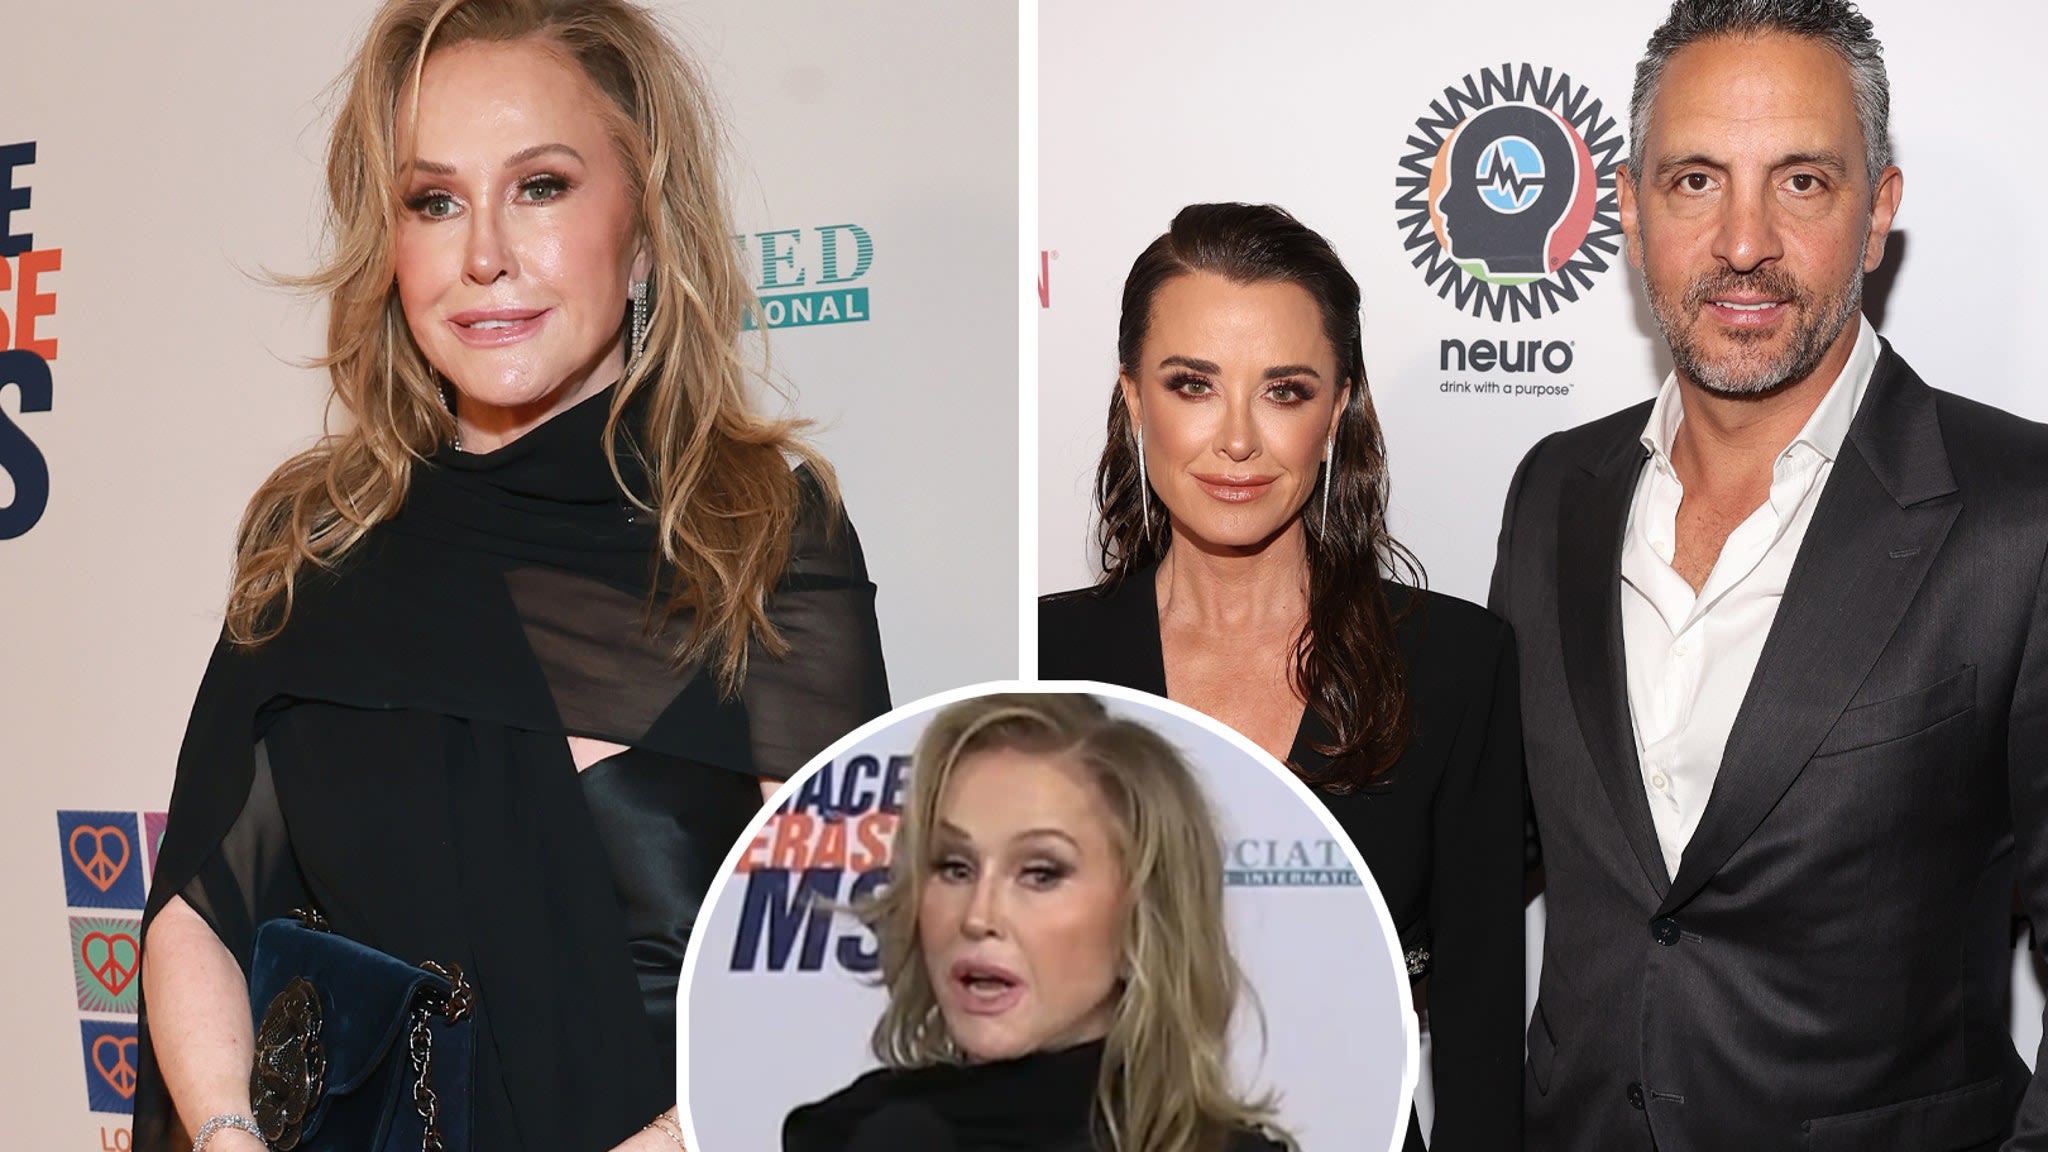 Kathy Hilton Claims Kyle Richards Was a 'Little Teary' on Wedding Anniversary After Mauricio Split (Exclusive)